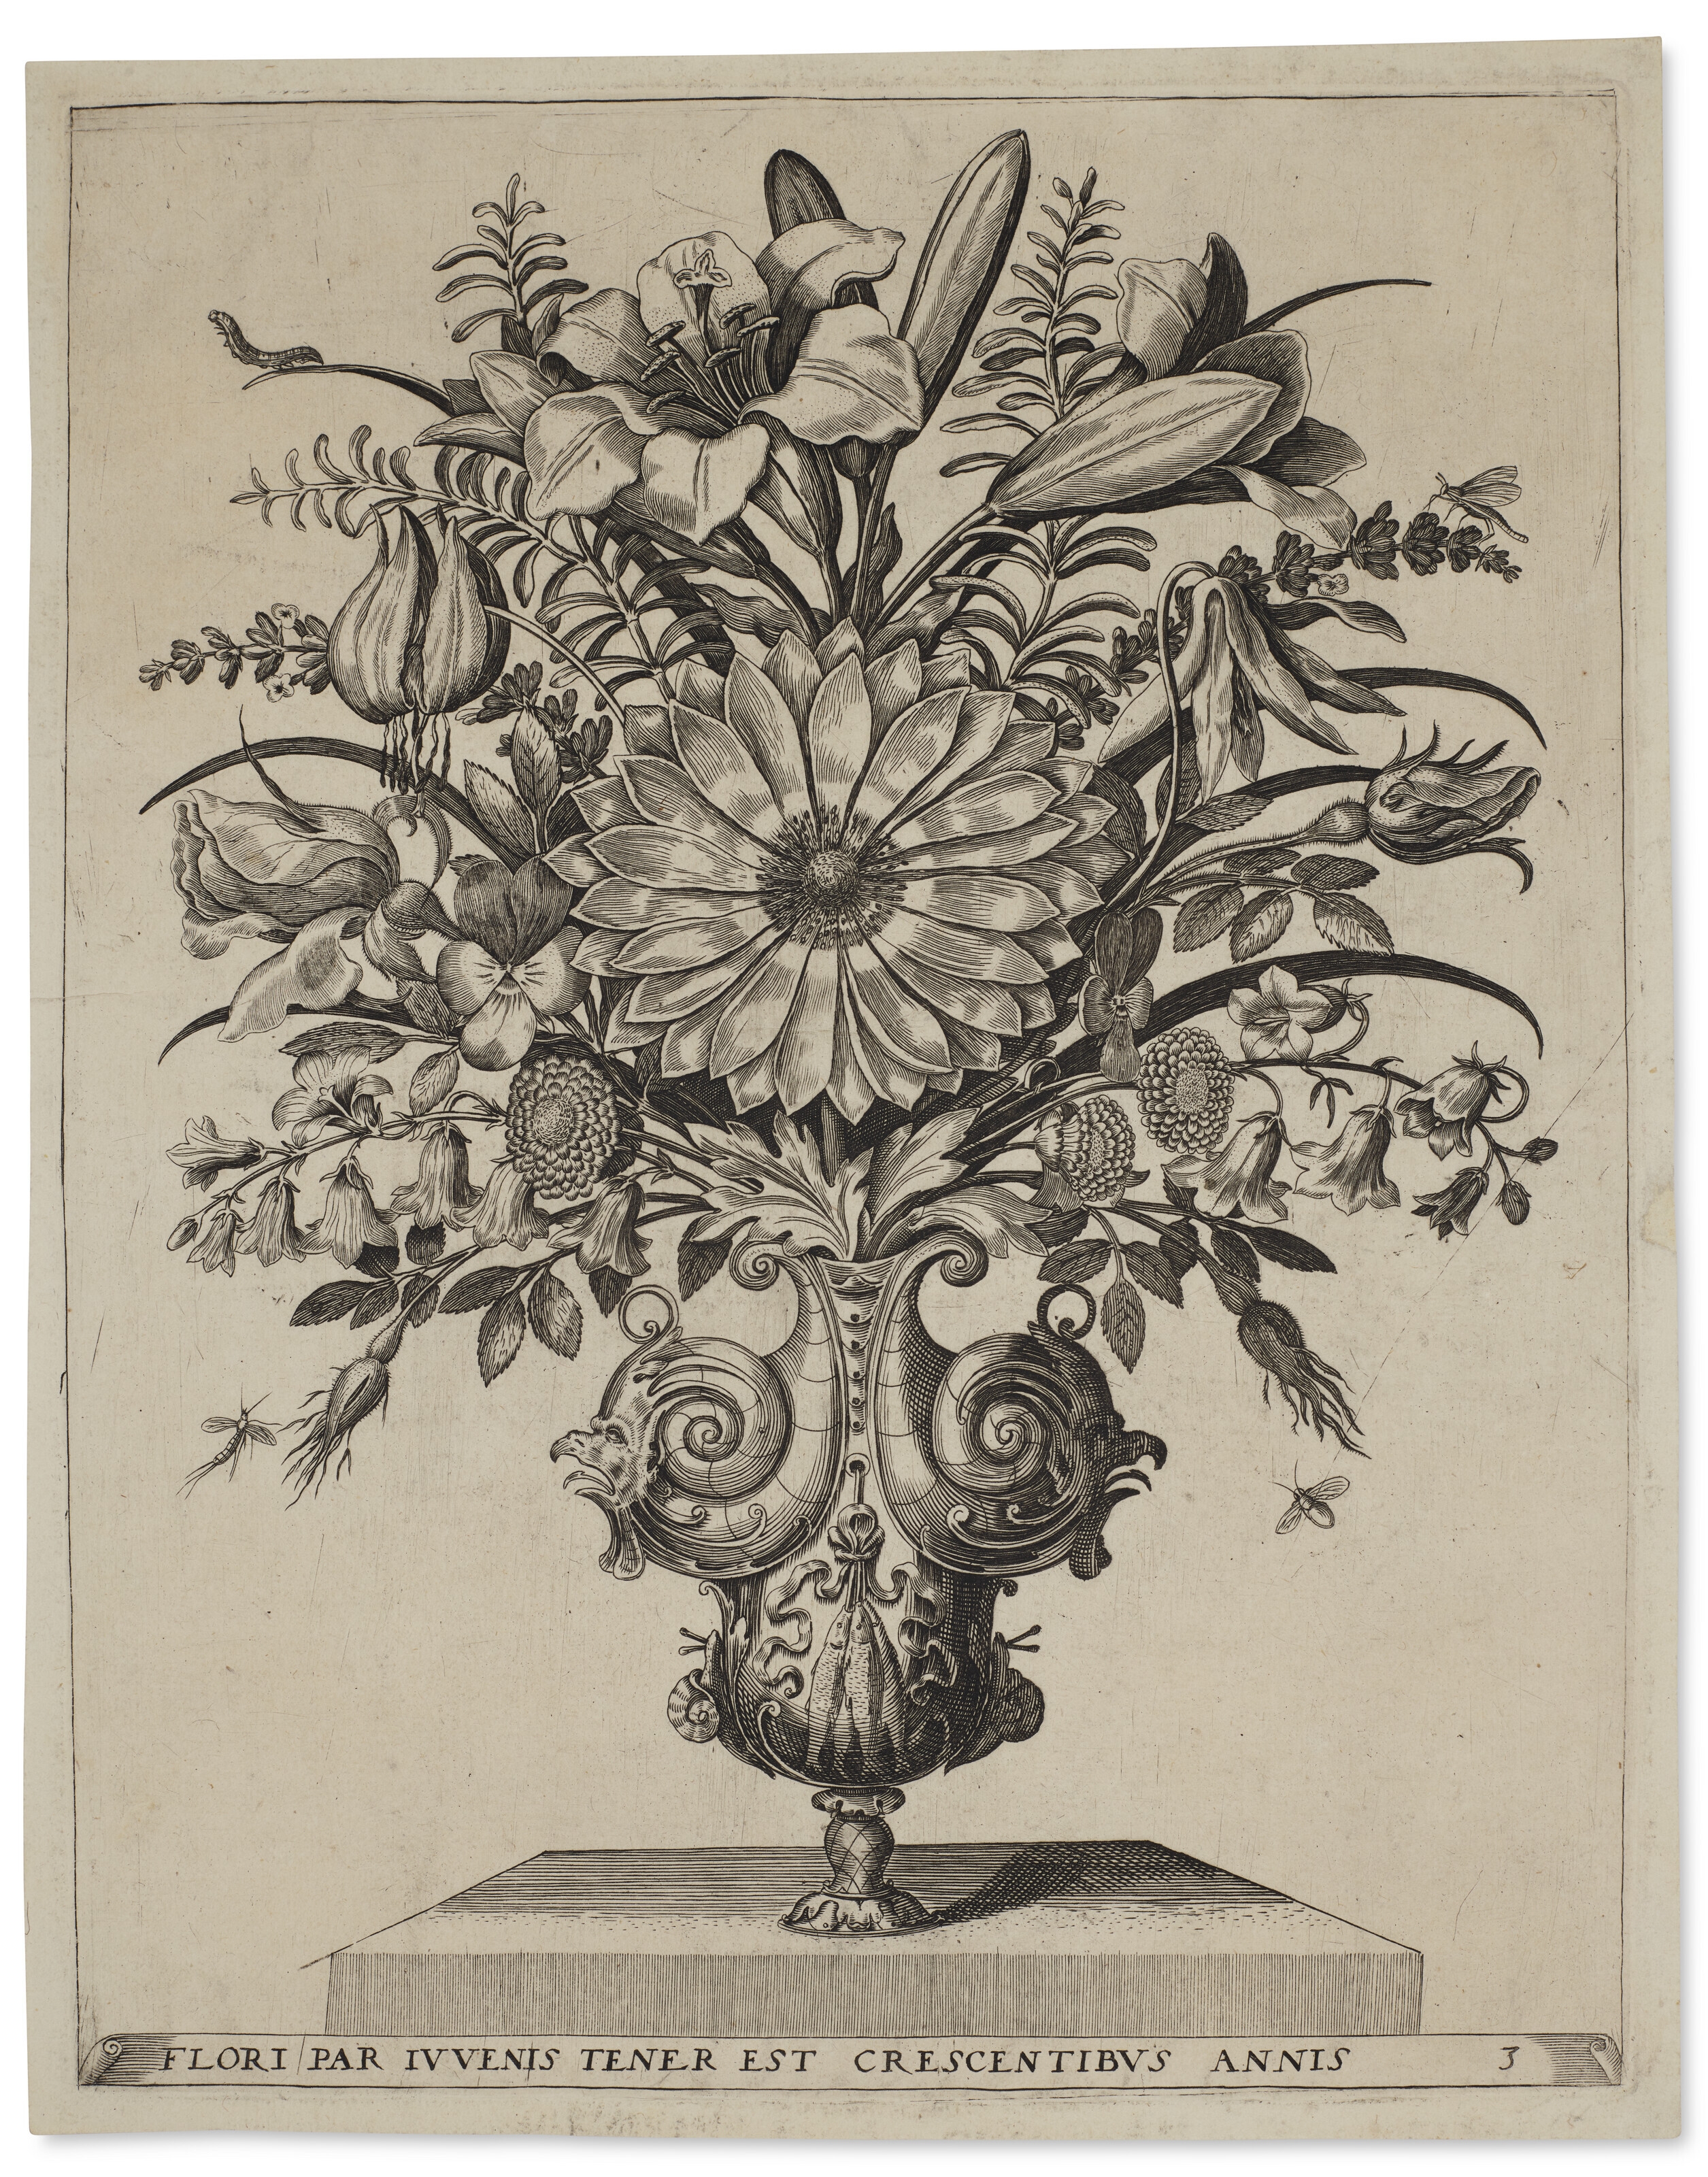 A suite of emblematic florilegium, featuring bouquets in ornate vases, surrounded by insects, and one snail by Johann Theodor De Bry, Jakob Kempener, 1604